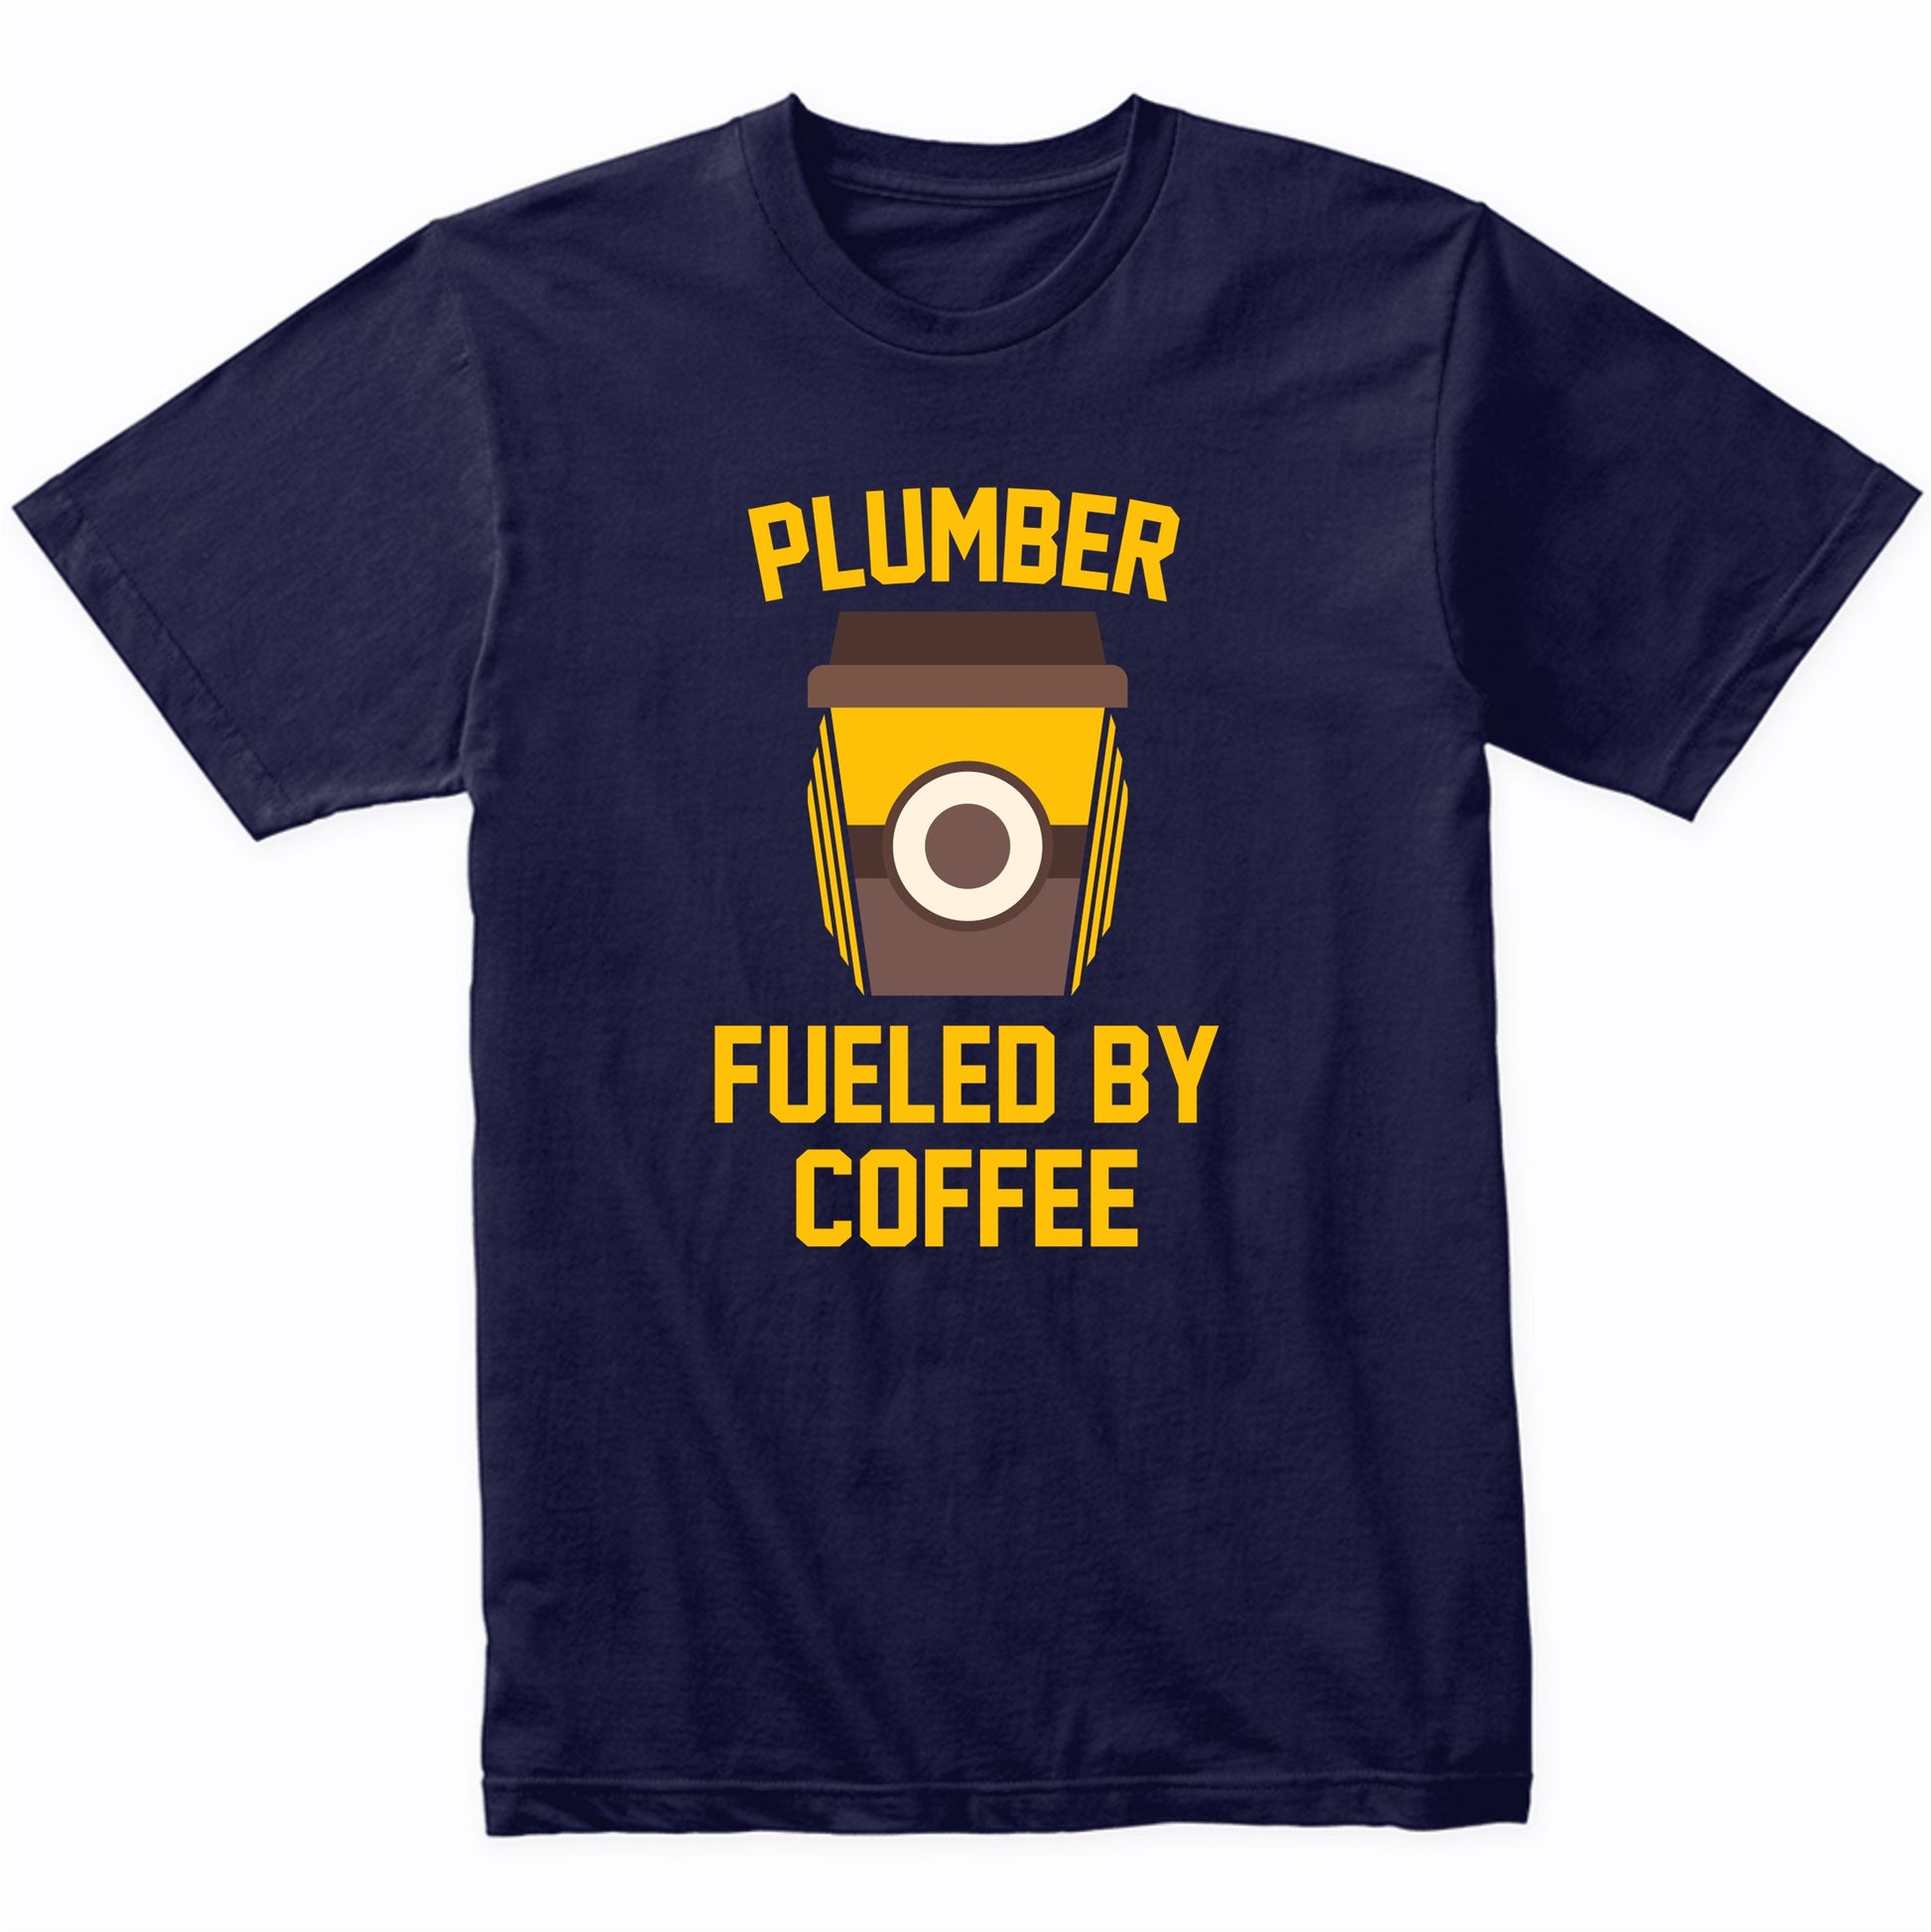 Plumber Fueled By Coffee Funny Plumbing Shirt